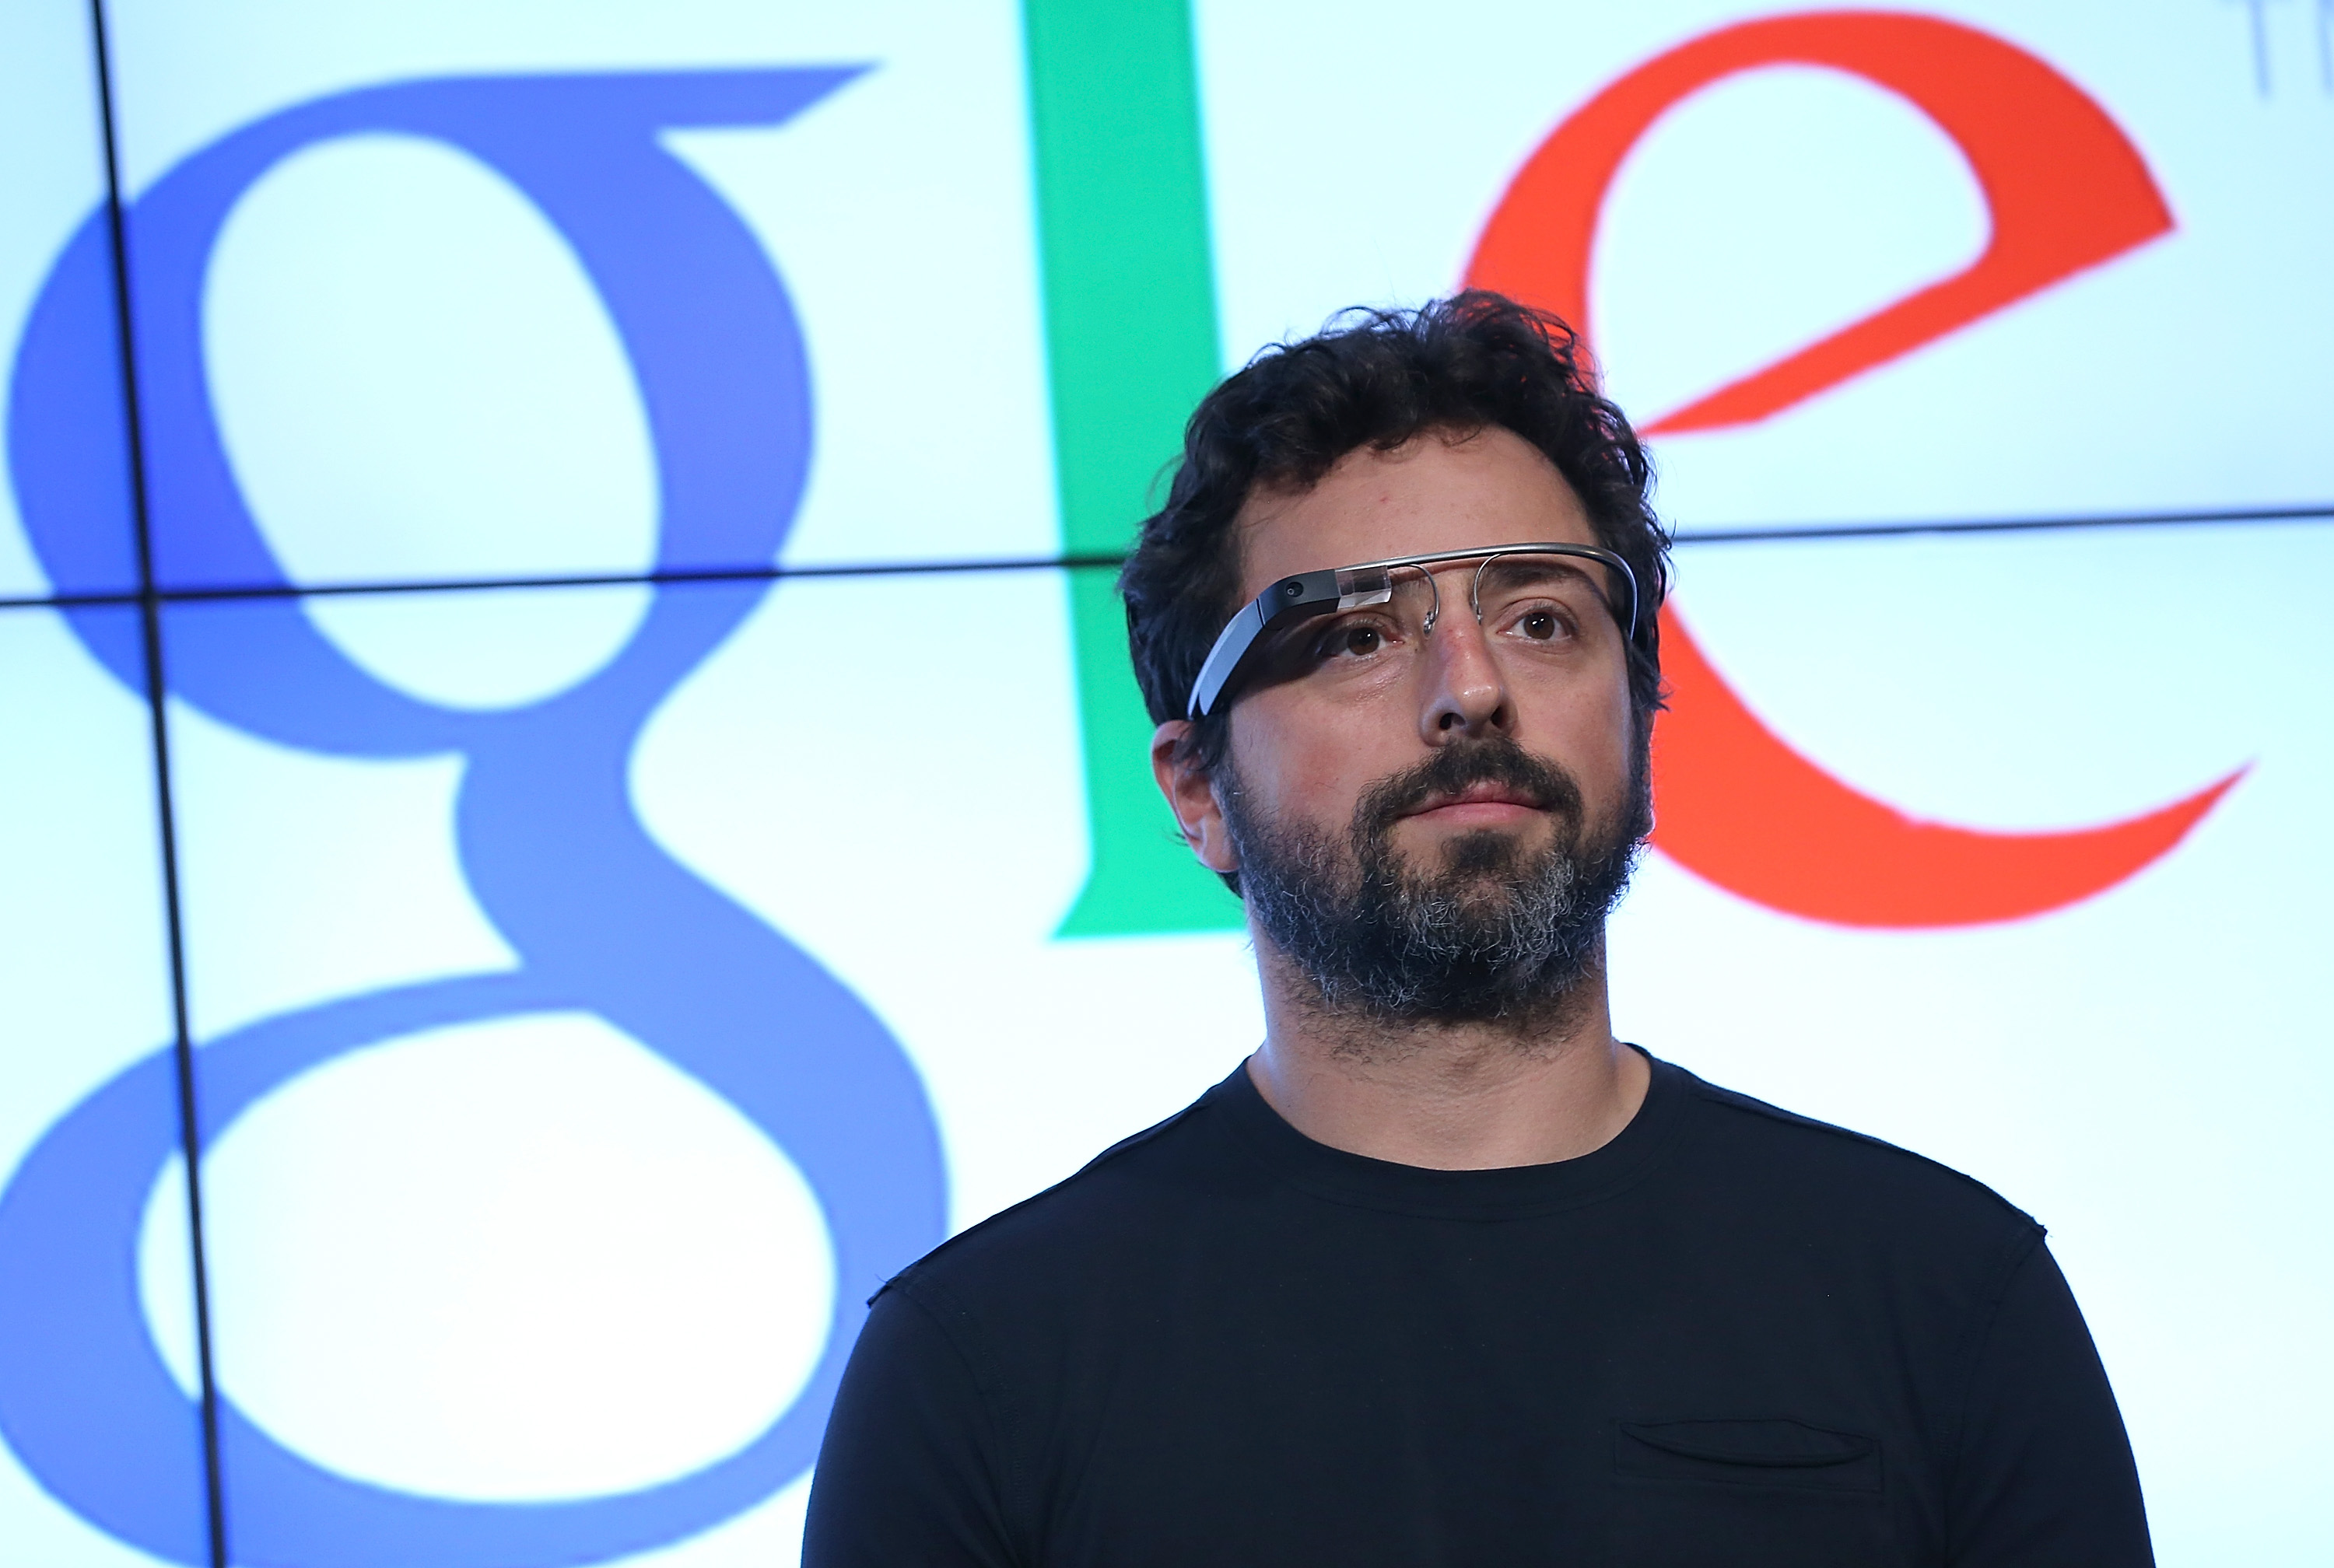 Google co-founder Sergey Brin looks on during a news conference at Google headquarters on September 25, 2012 in Mountain View, California. (Justin Sullivan Getty Images)